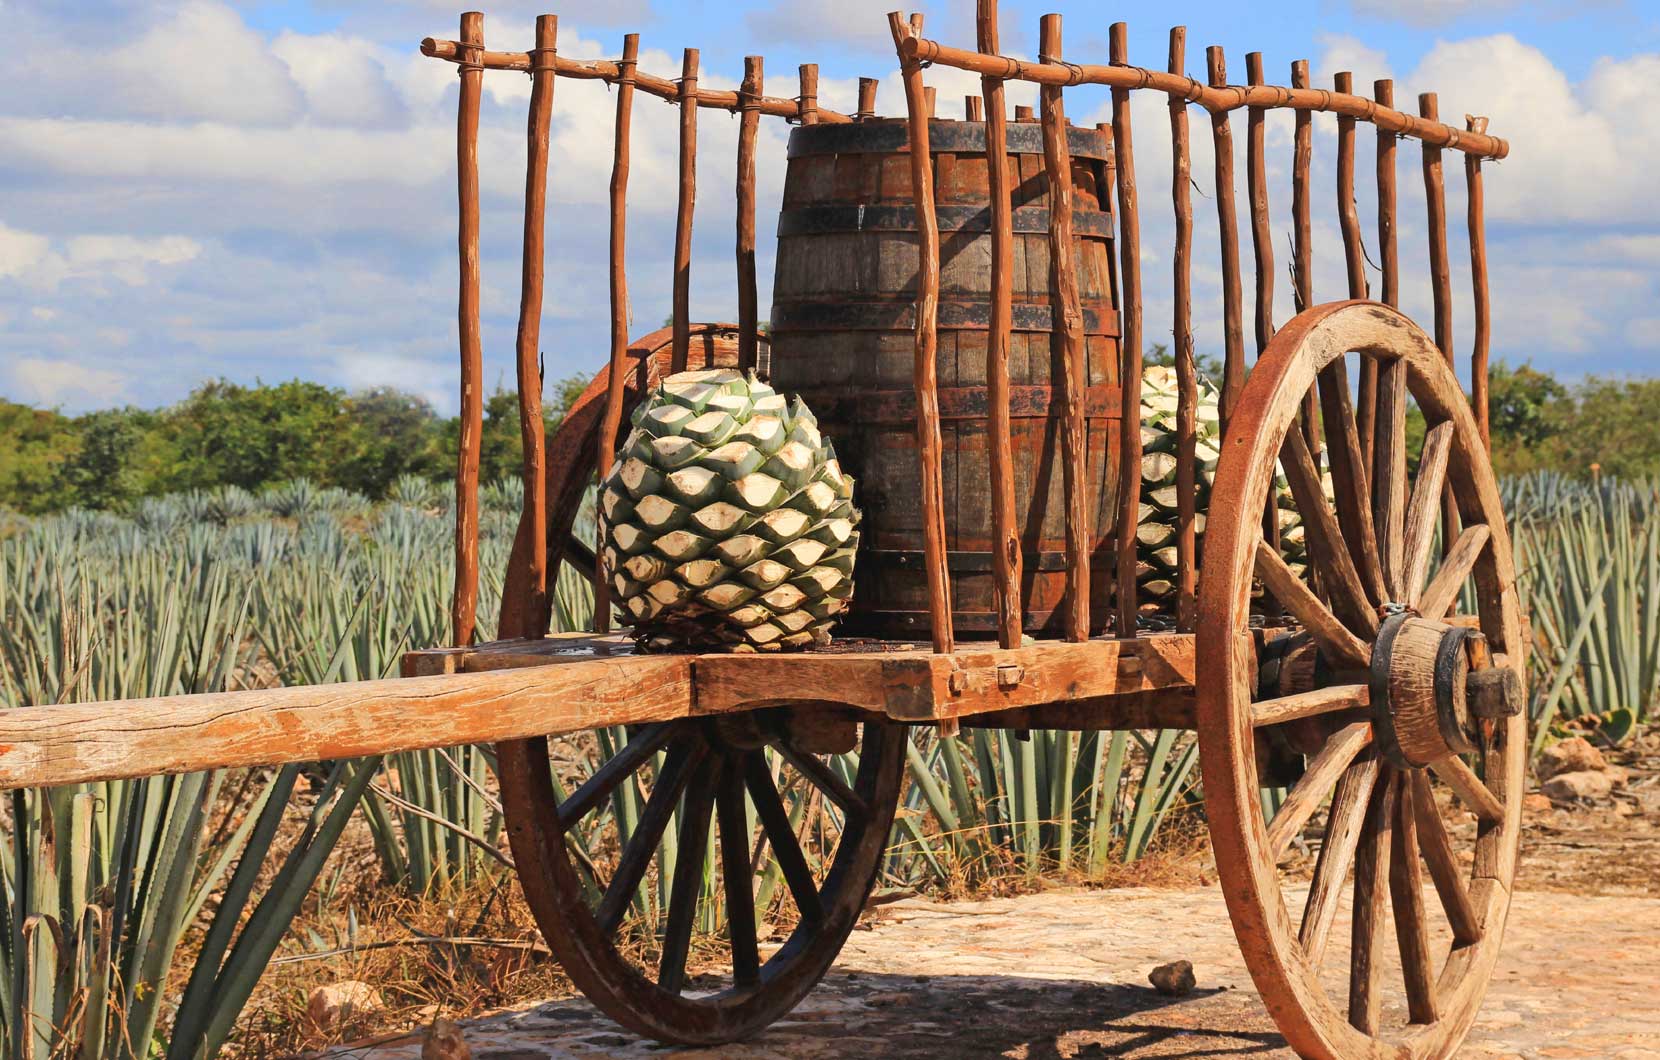 After the syrup from the piña is distilled, the liquid ferments in a wooden or steel vat.